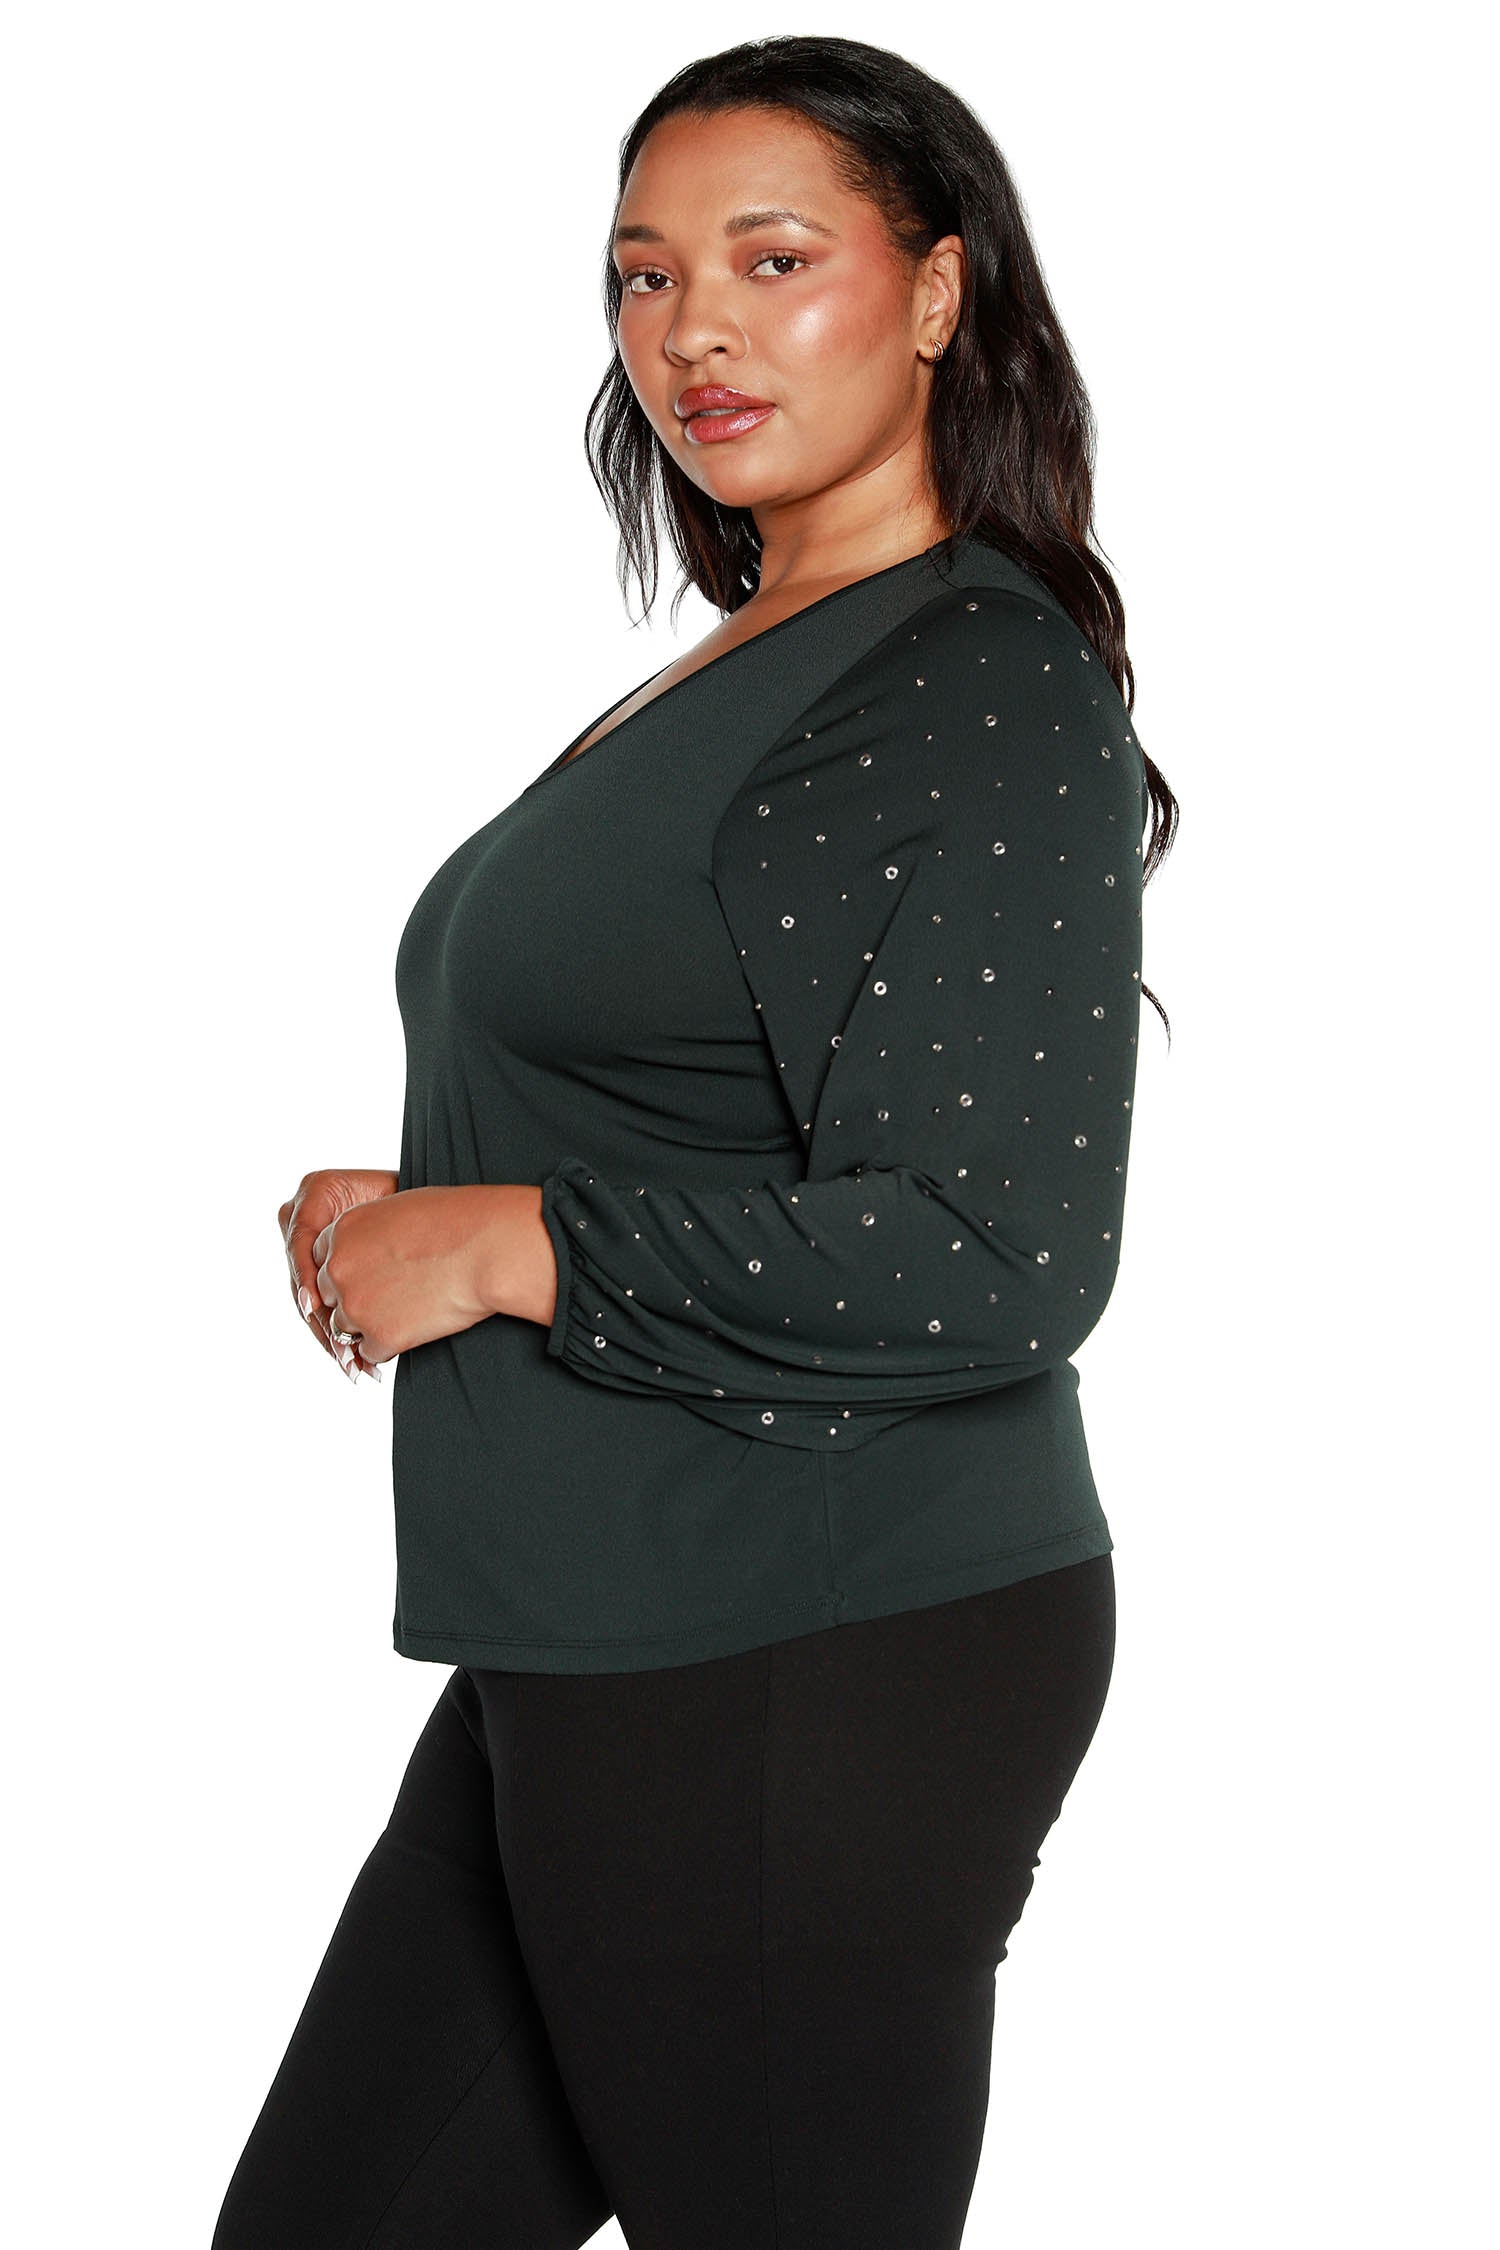 Women's V-neck Knit Blouse with Rhinestone and Grommet Statement Sleeves | Curvy